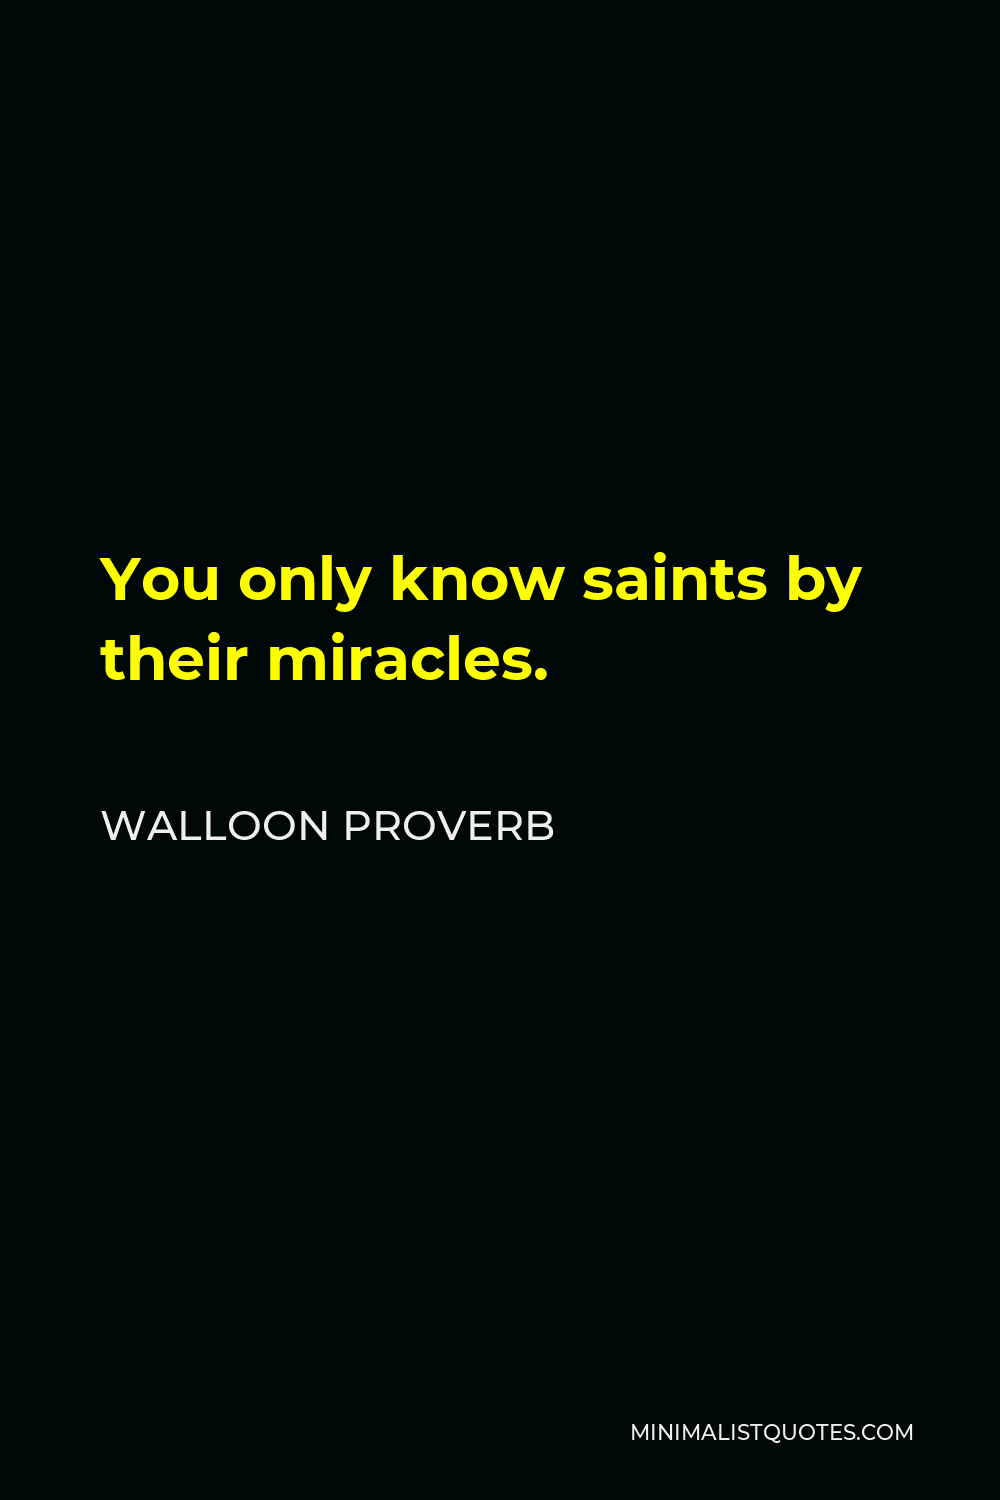 Walloon Proverb Quote - You only know saints by their miracles.